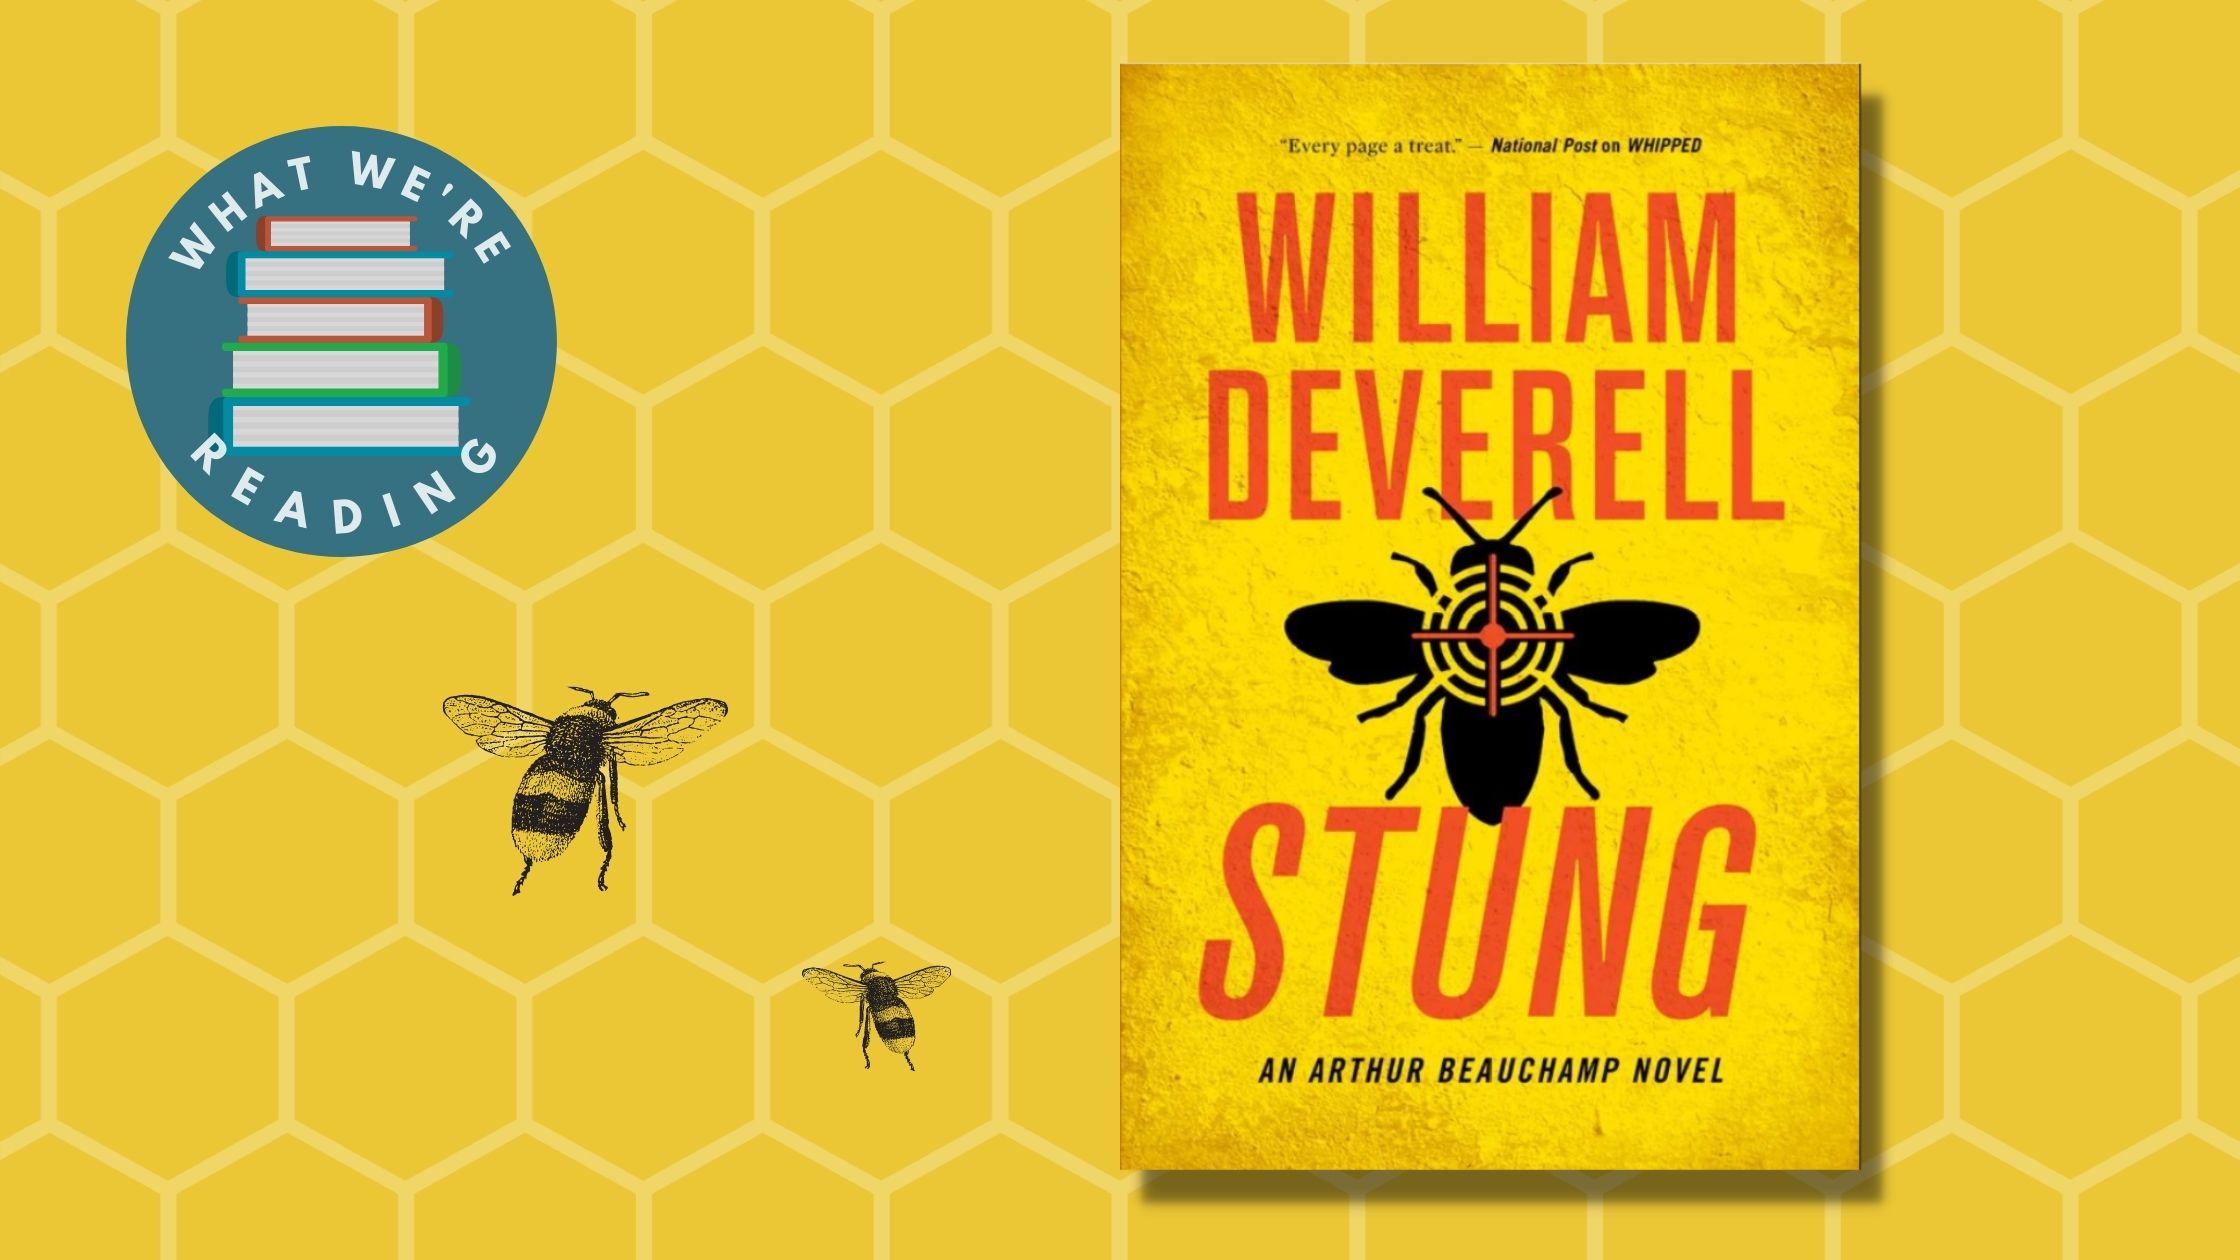 Stung book cover on honeycomb background